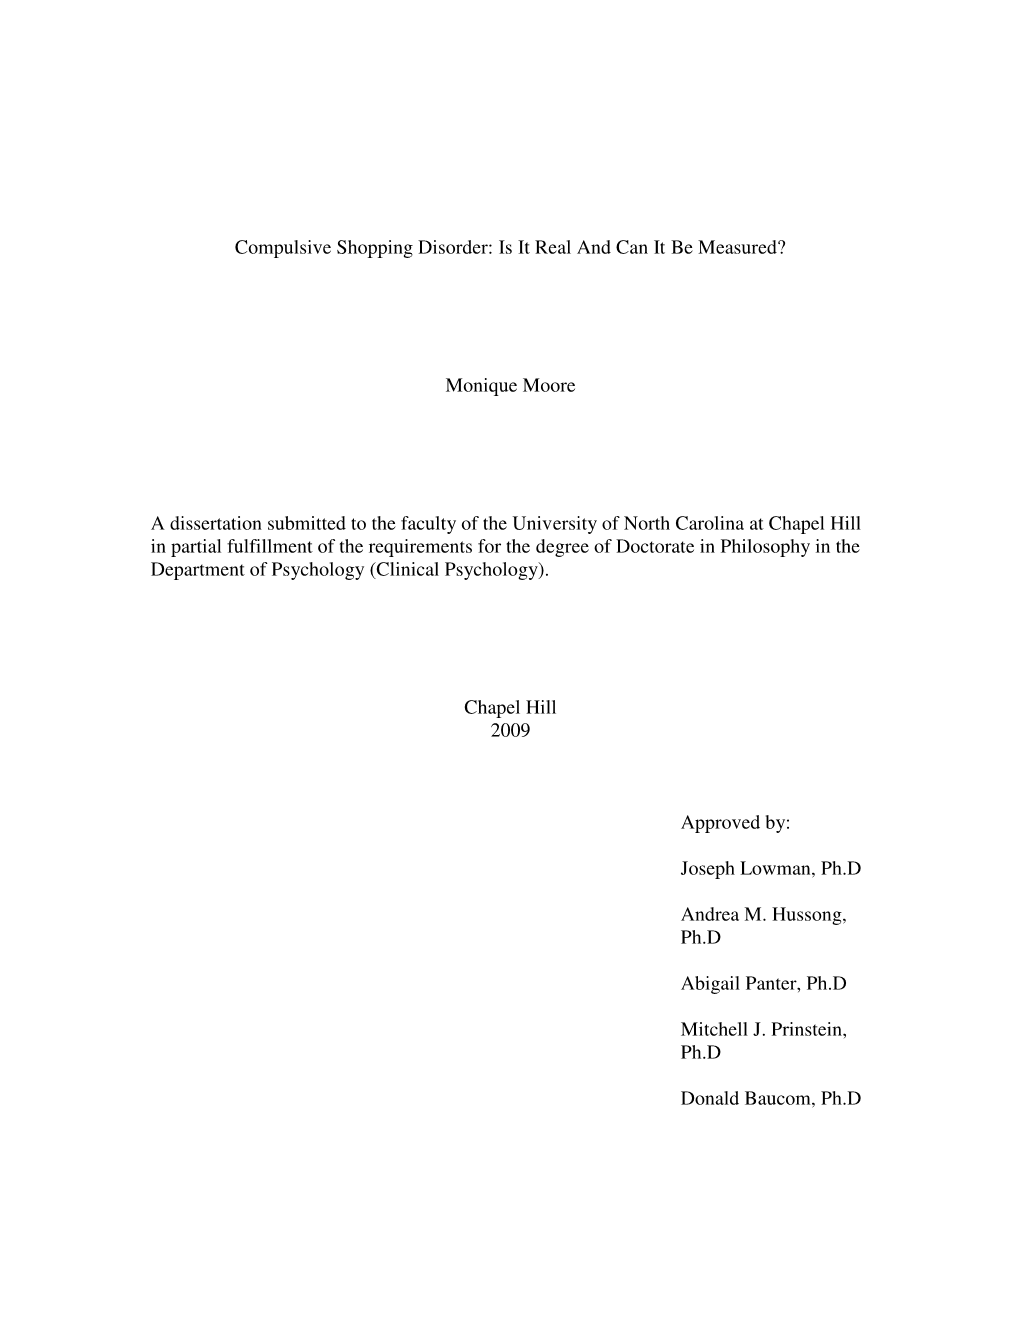 Compulsive Shopping Disorder: Is It Real and Can It Be Measured? Monique Moore a Dissertation Submitted to the Faculty of the Un